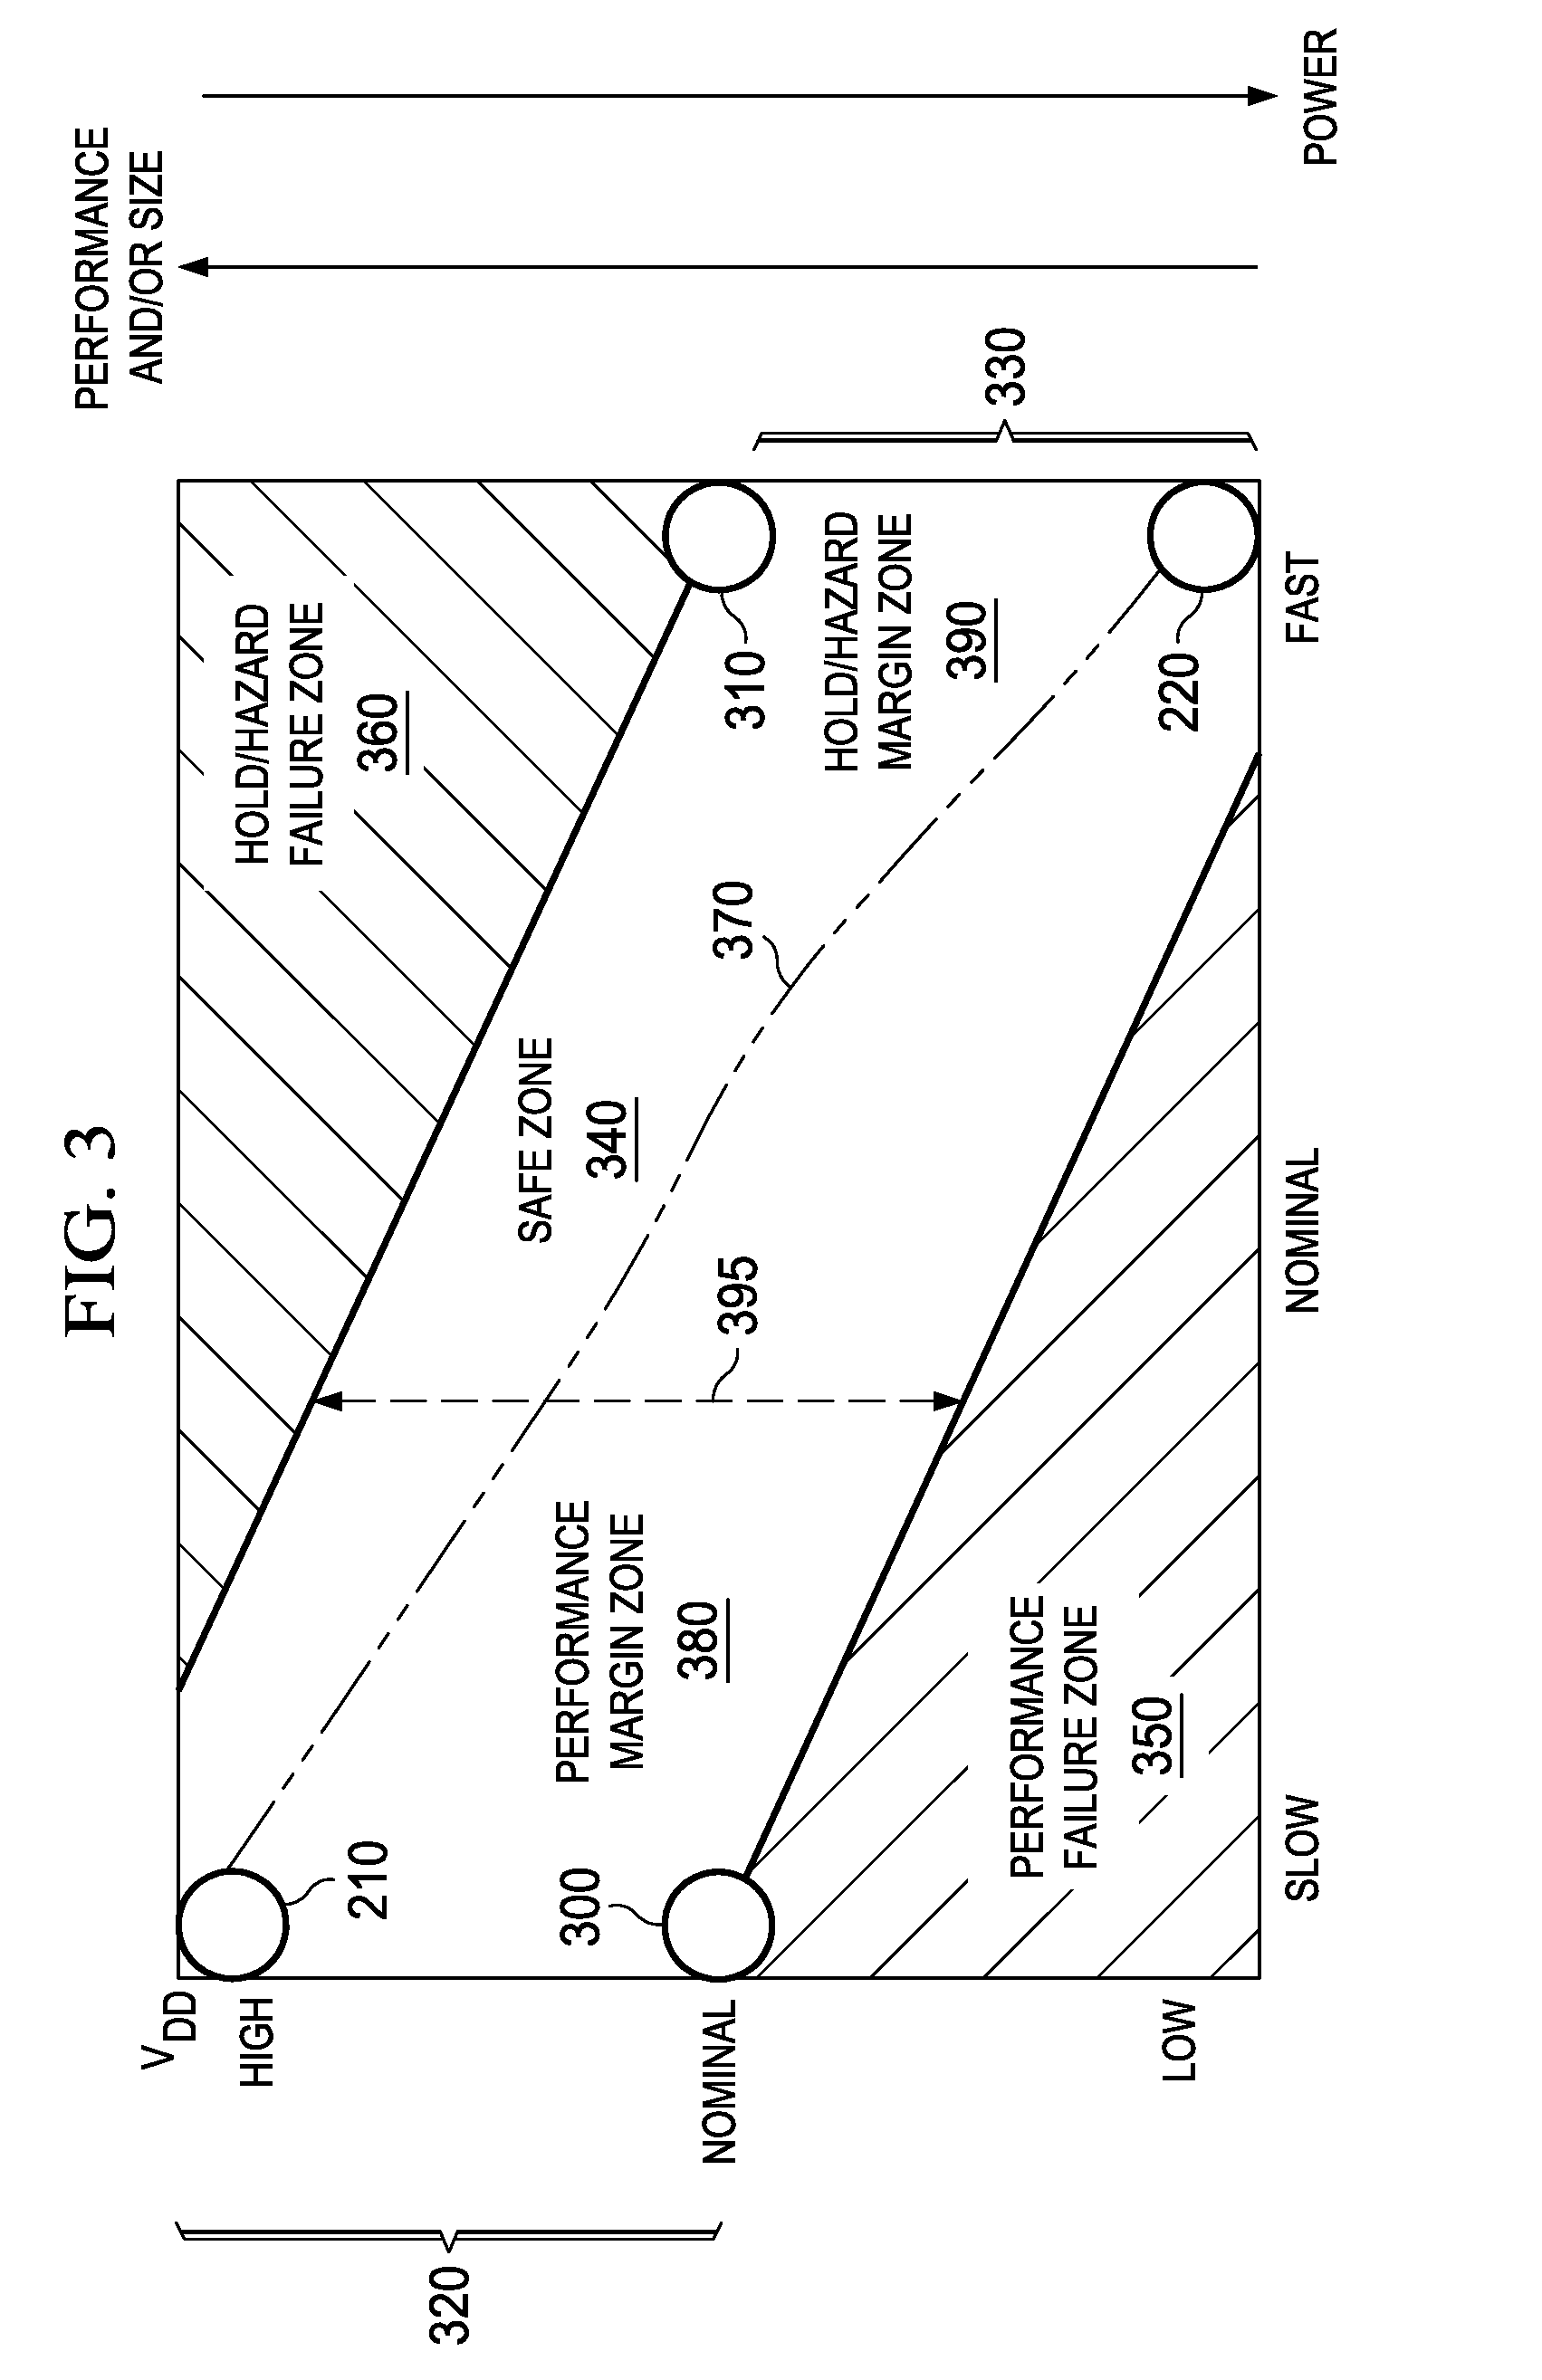 Systematic, normalized metric for analyzing and comparing optimization techniques for integrated circuits employing voltage scaling and integrated circuits designed thereby